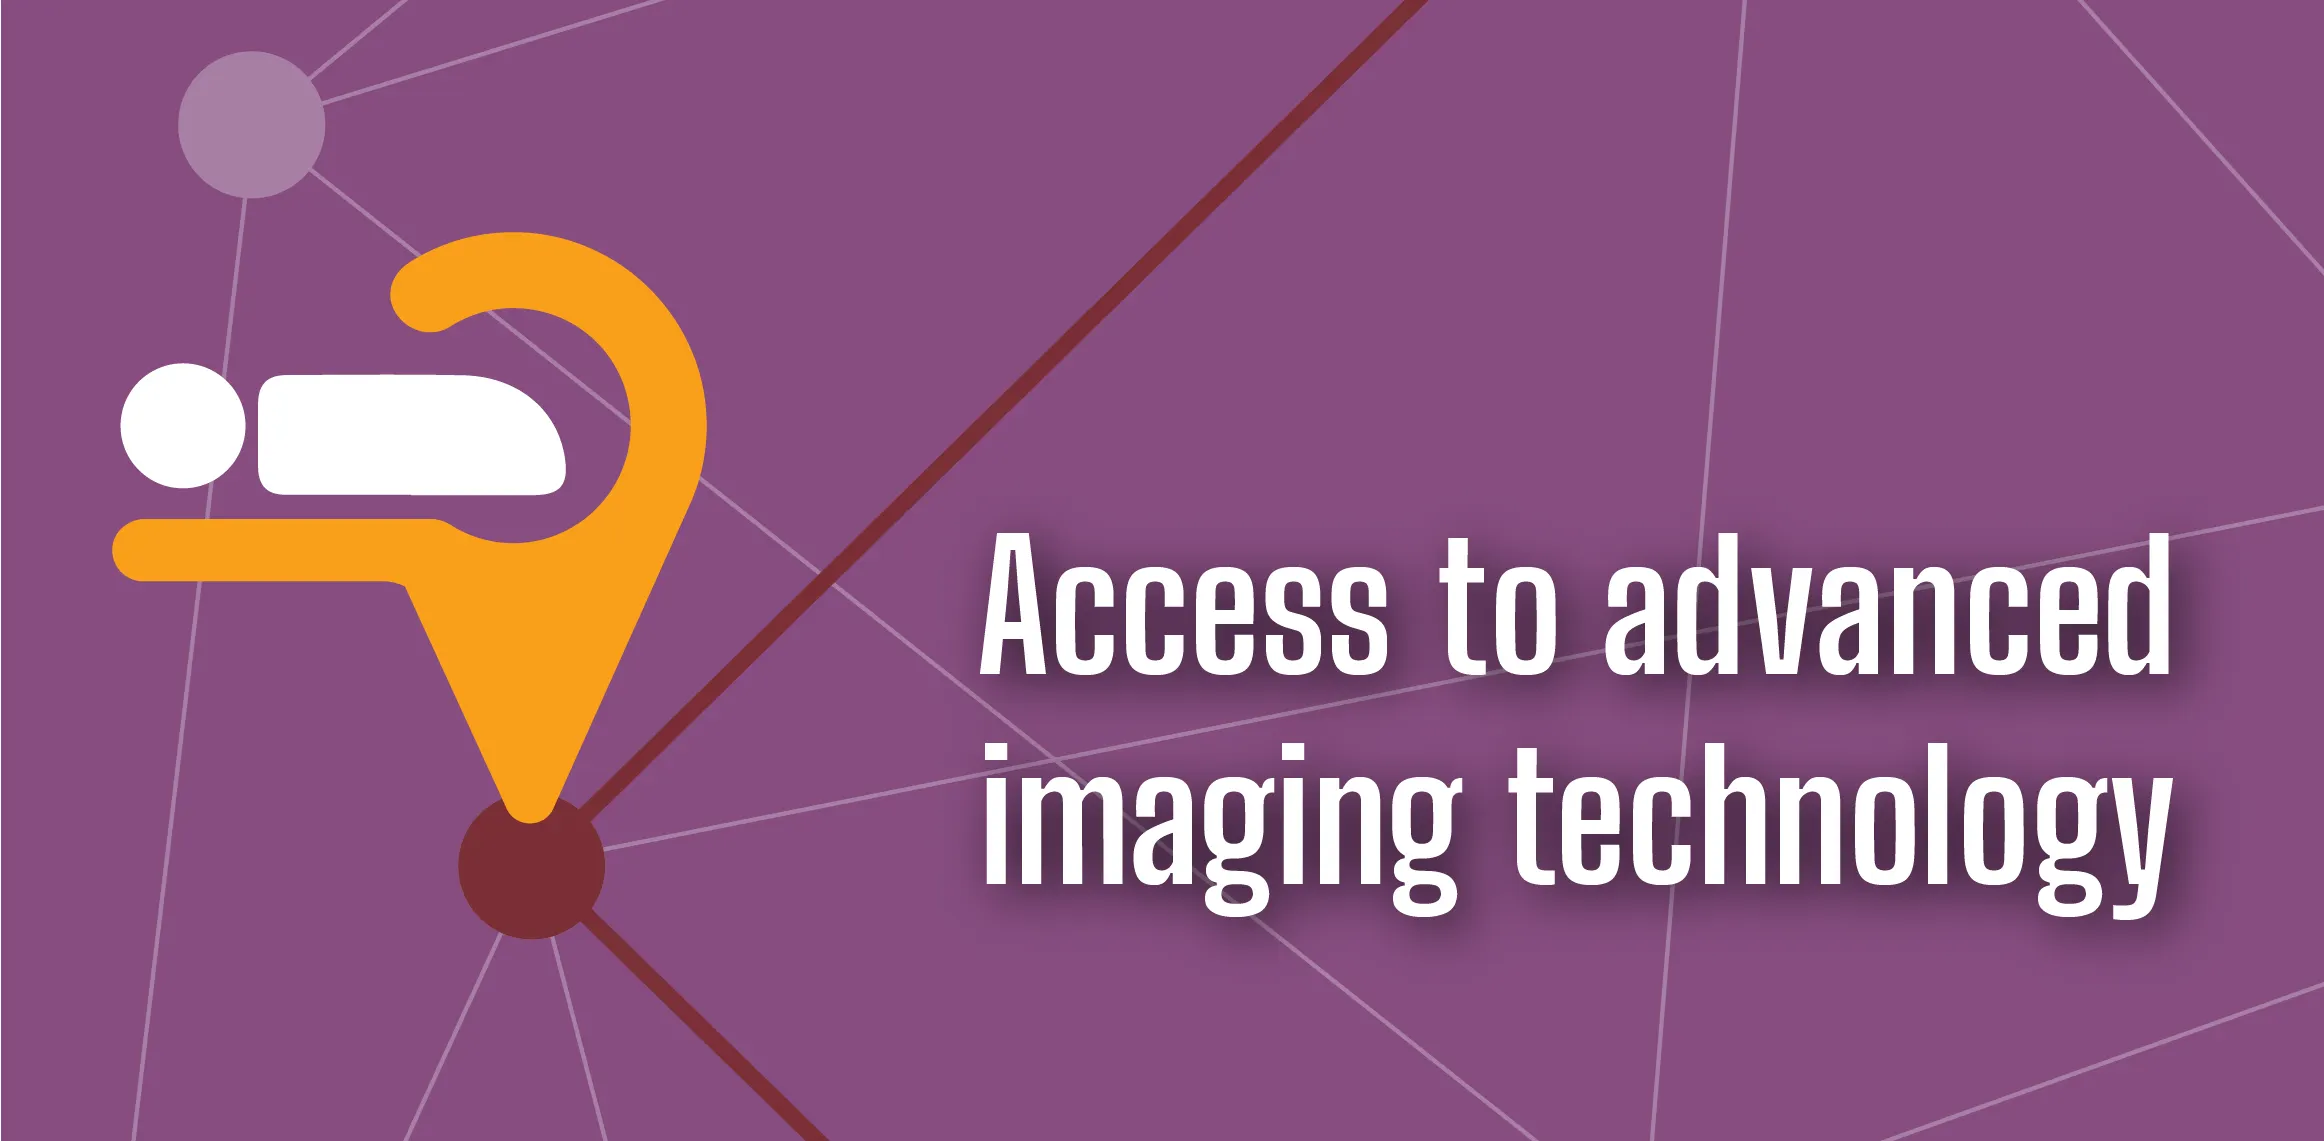 Access to advanced imaging technology